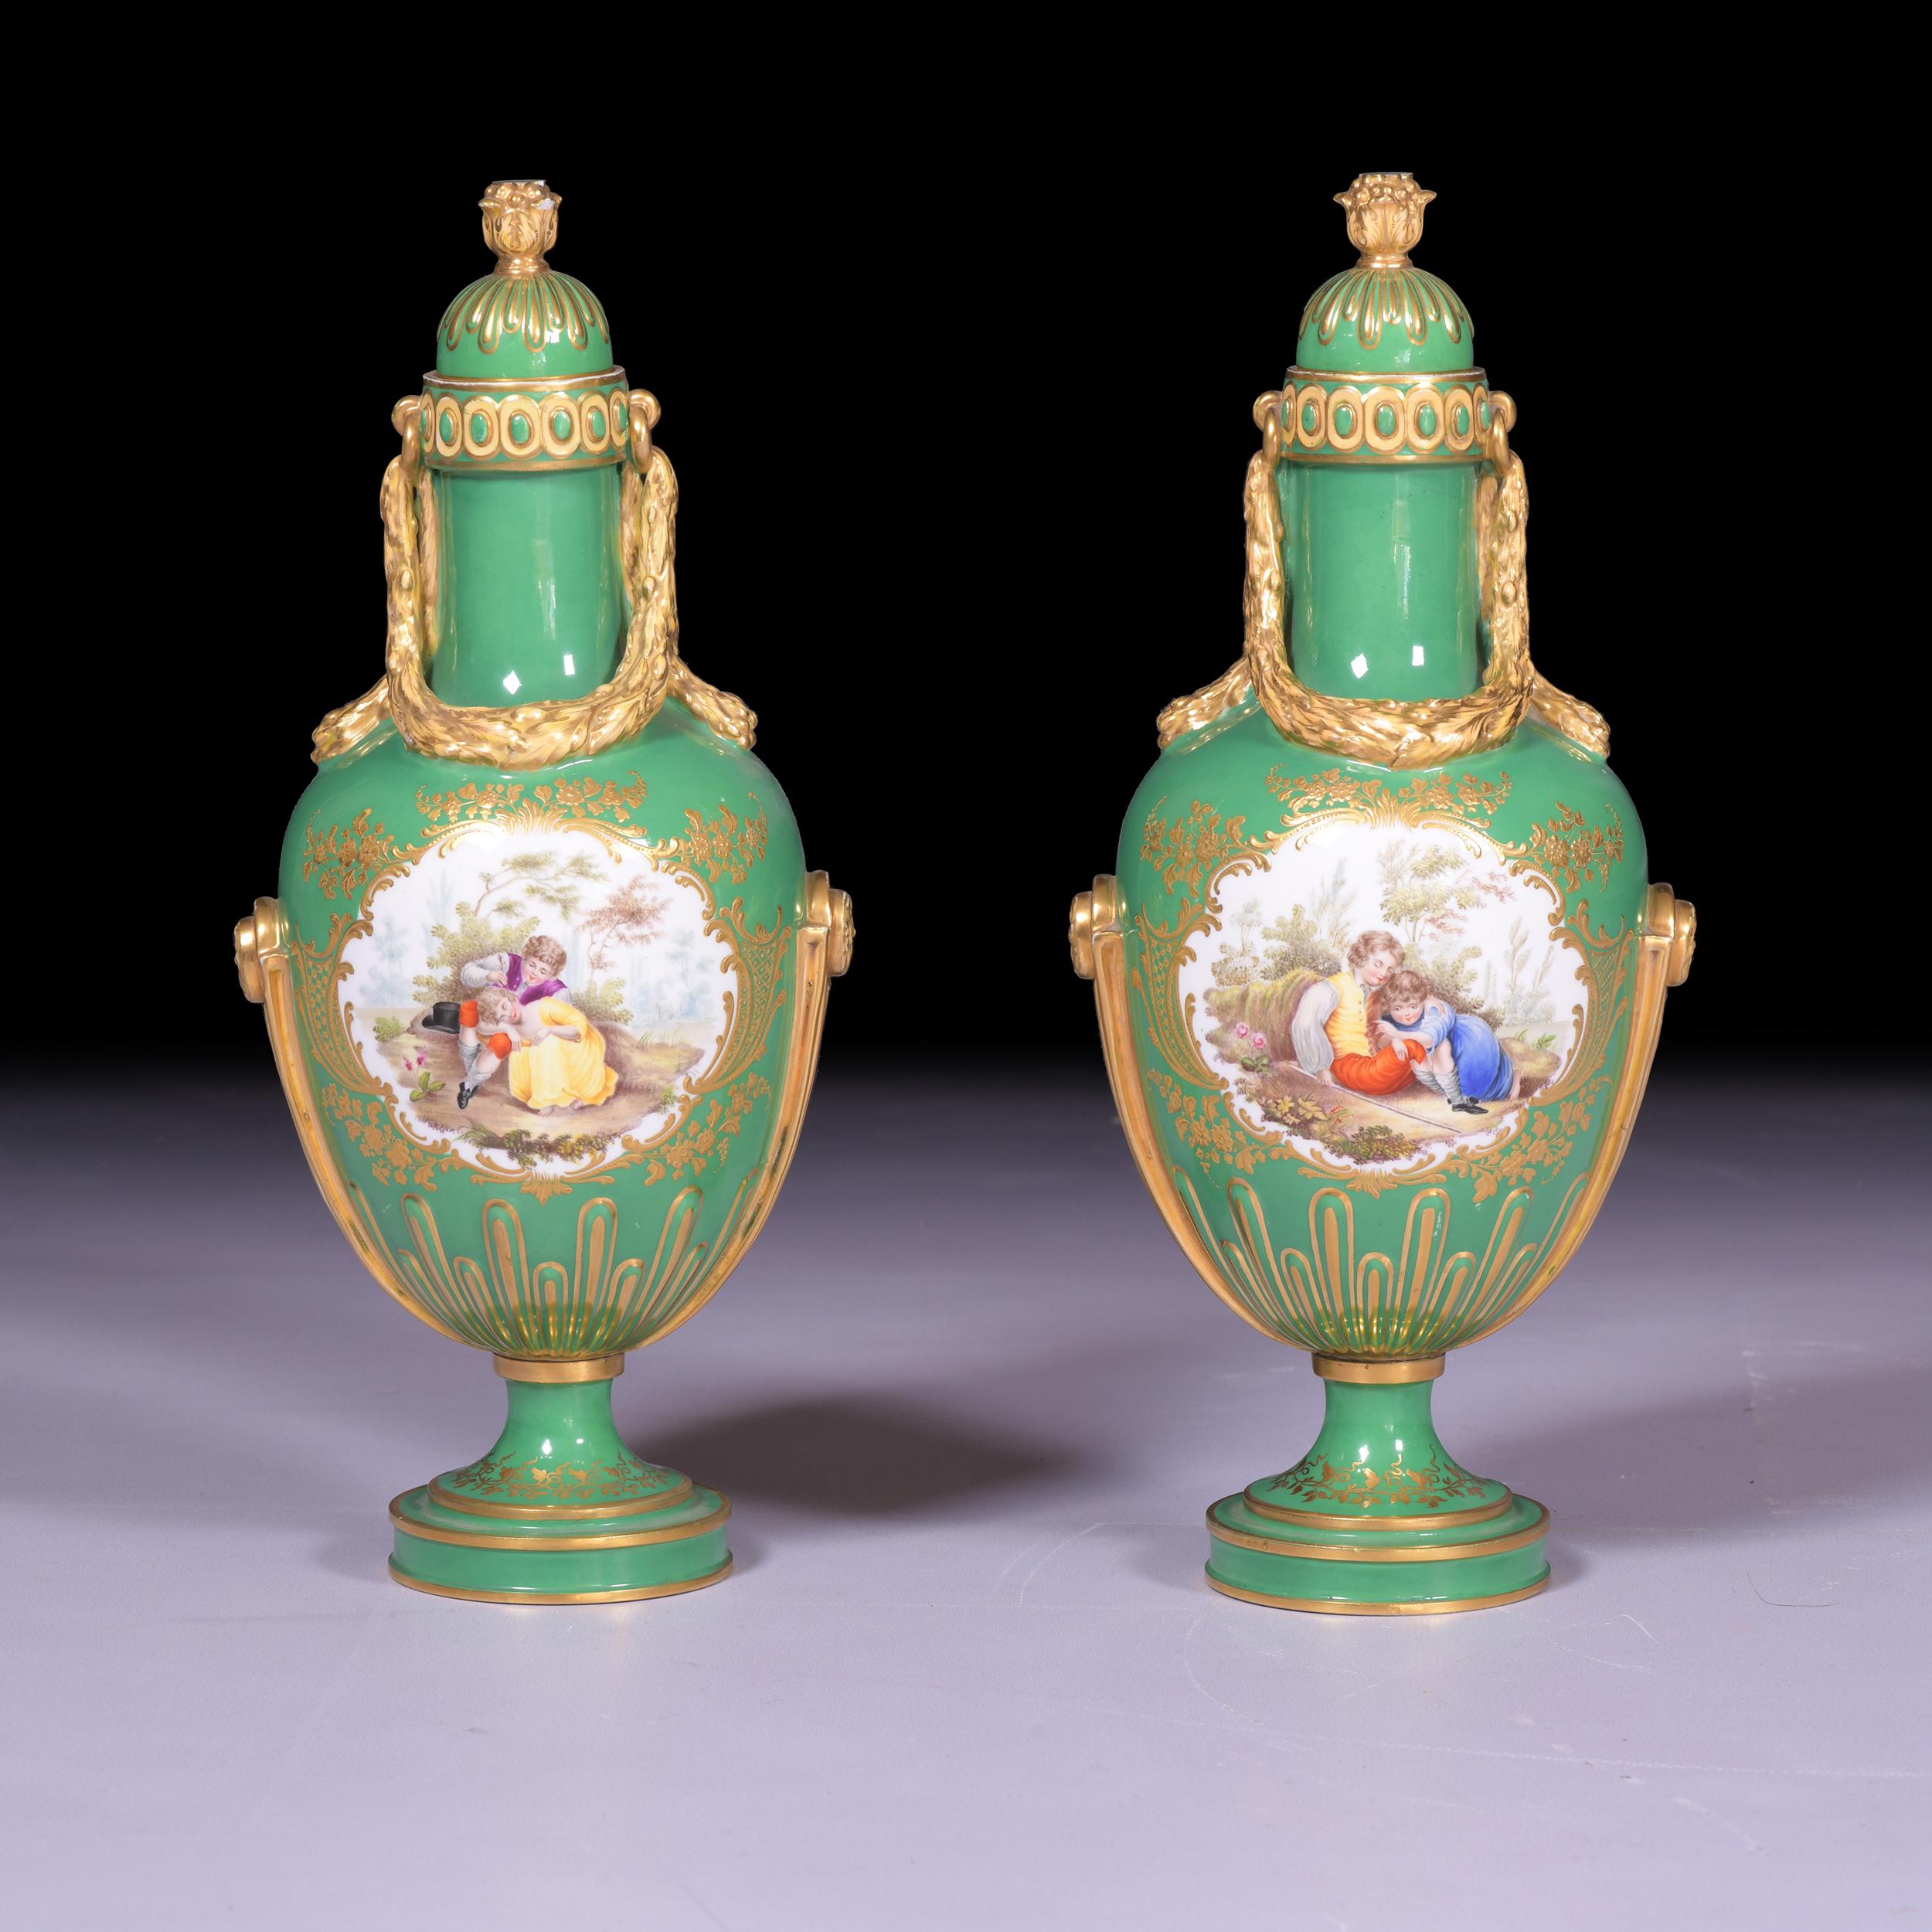 Pair Of 19th Century English Porcelain Vases & Covers By Coalport For Sale 6